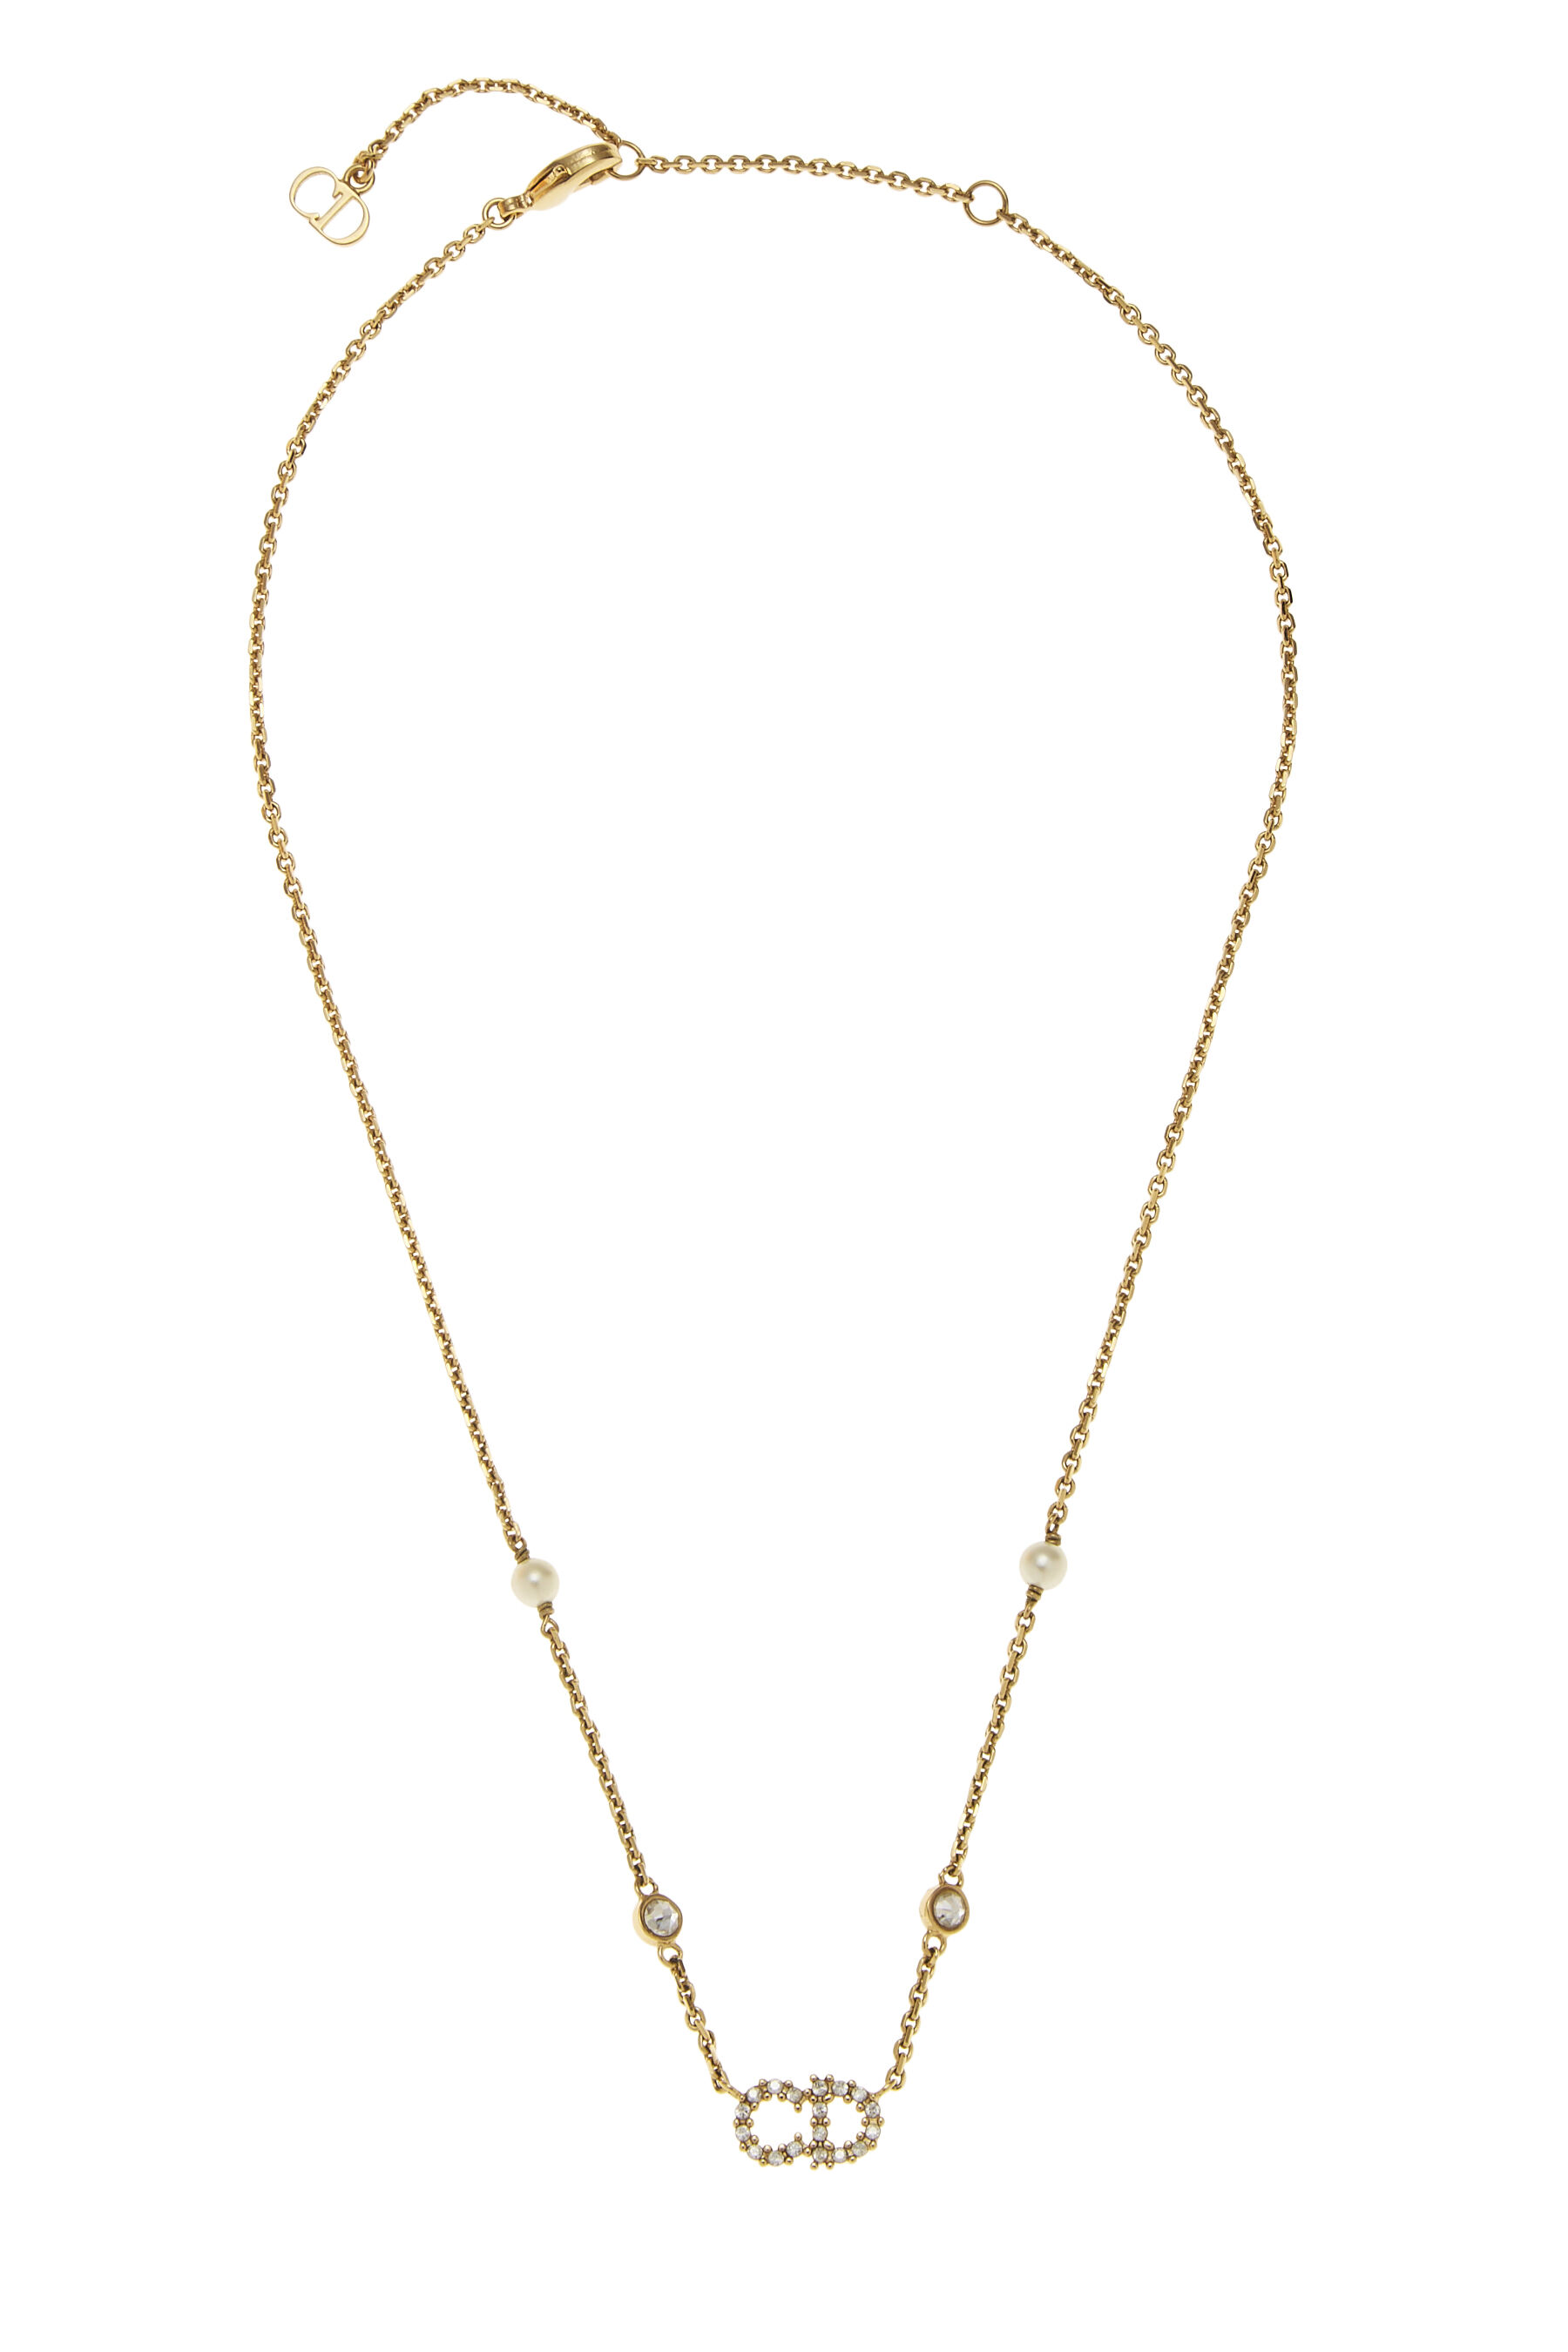 Gold & Crystal Clair D Lune Necklace